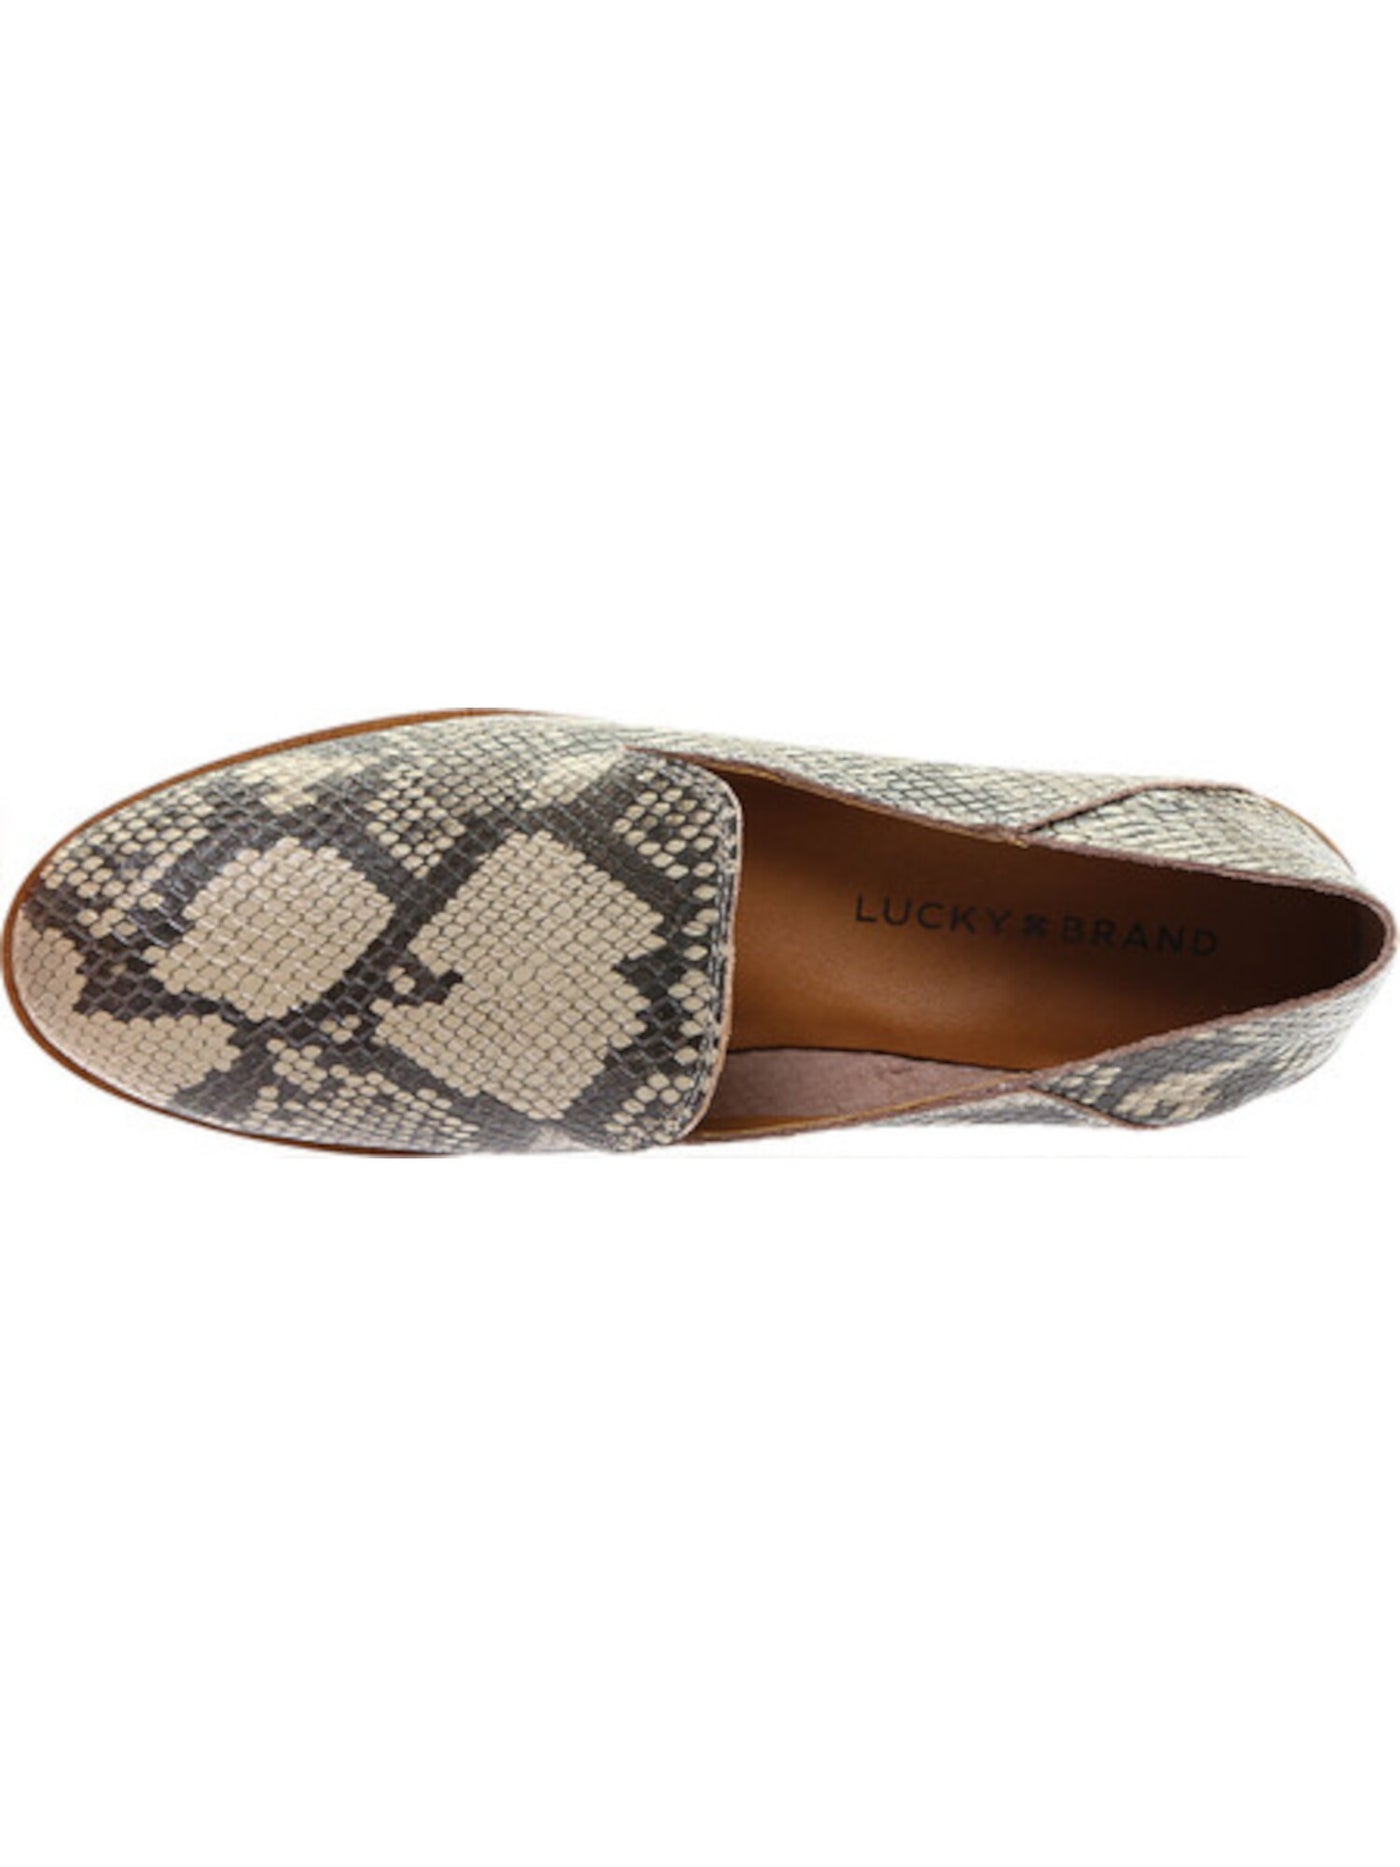 LUCKY BRAND Womens Gray Snake Cut-Out Side Comfort Cahill Round Toe Block Heel Slip On Leather Flats Shoes M